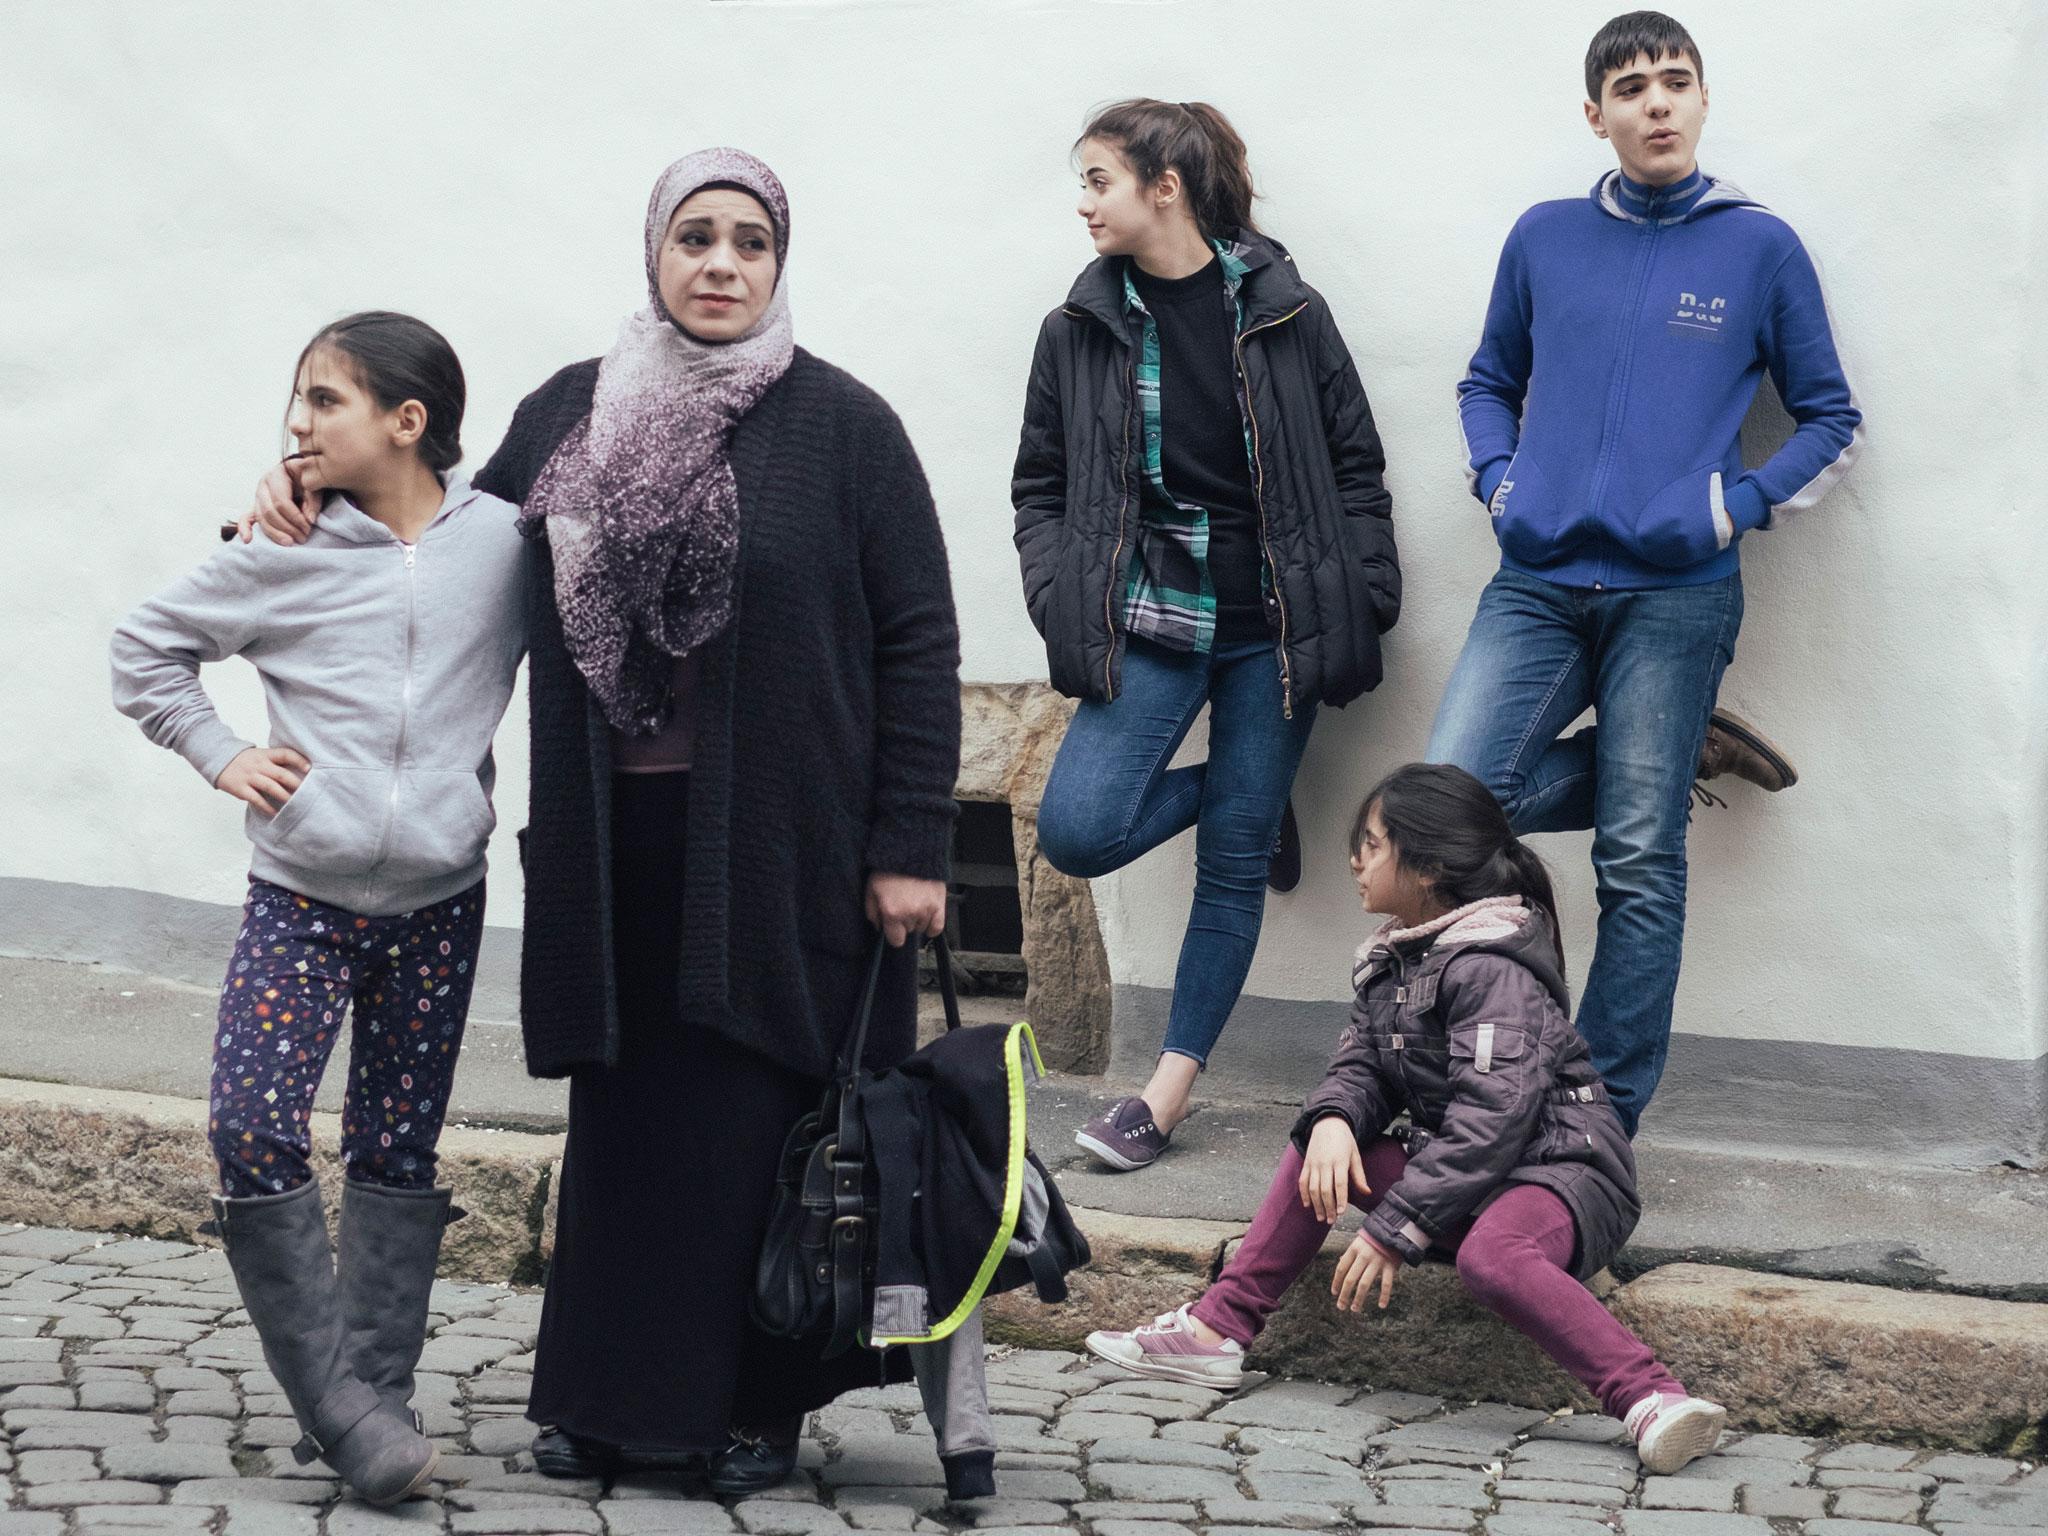 Hala Kamil and her family, who feature in an Oscar-nominated documentary about their escape from Syria